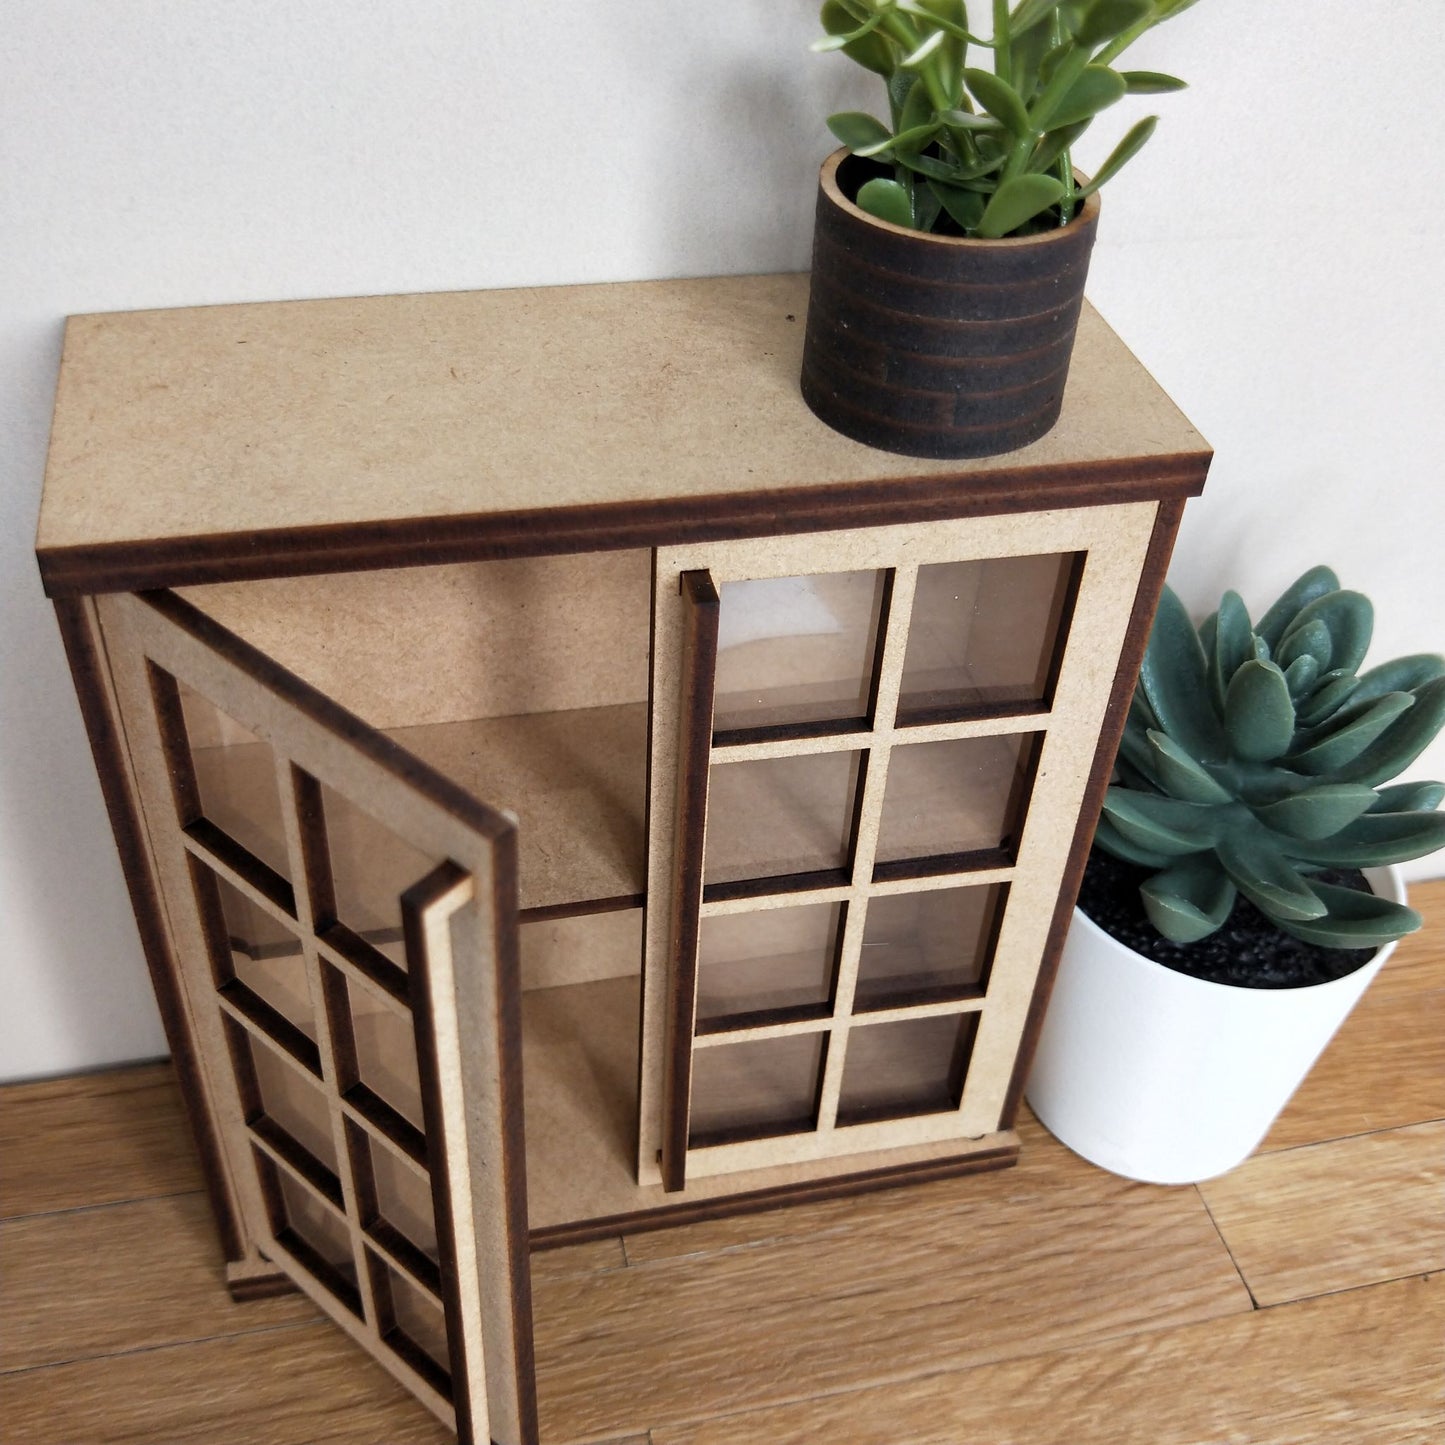 DIY Wooden Kit - 1/6 Scale Overhead Cupboard Square Cutout